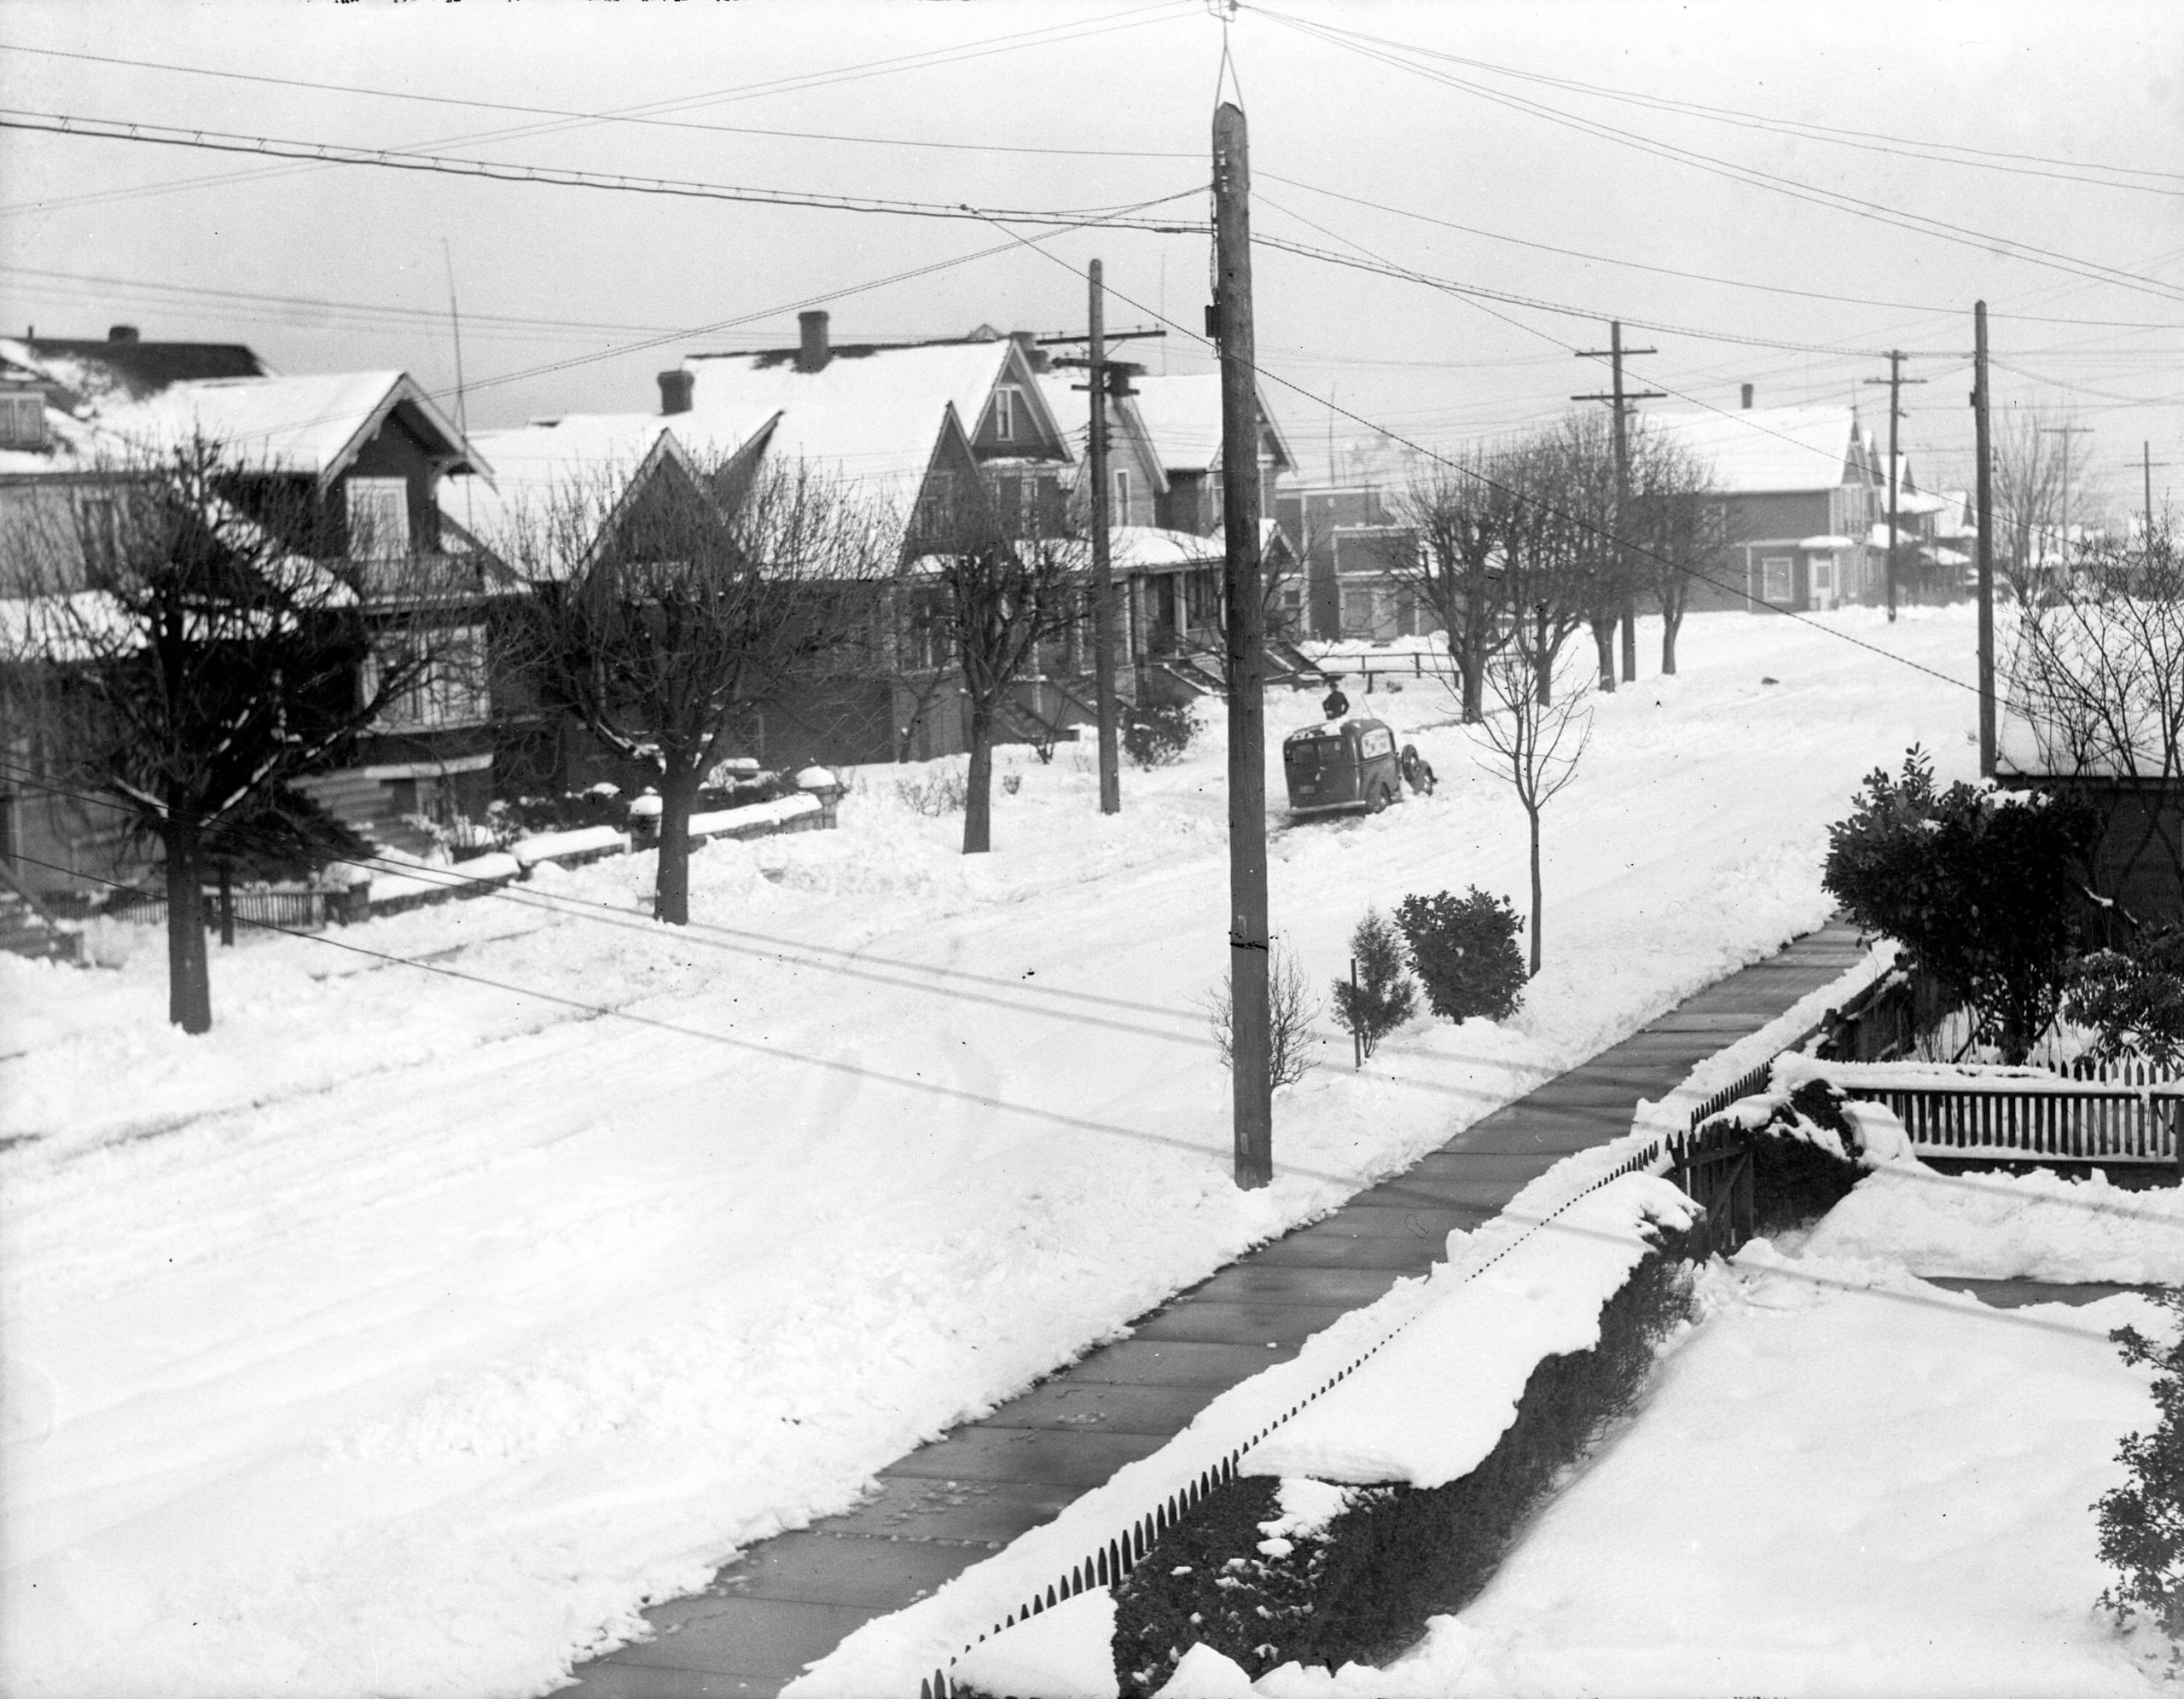 1930 - Vancouver residential street in snow